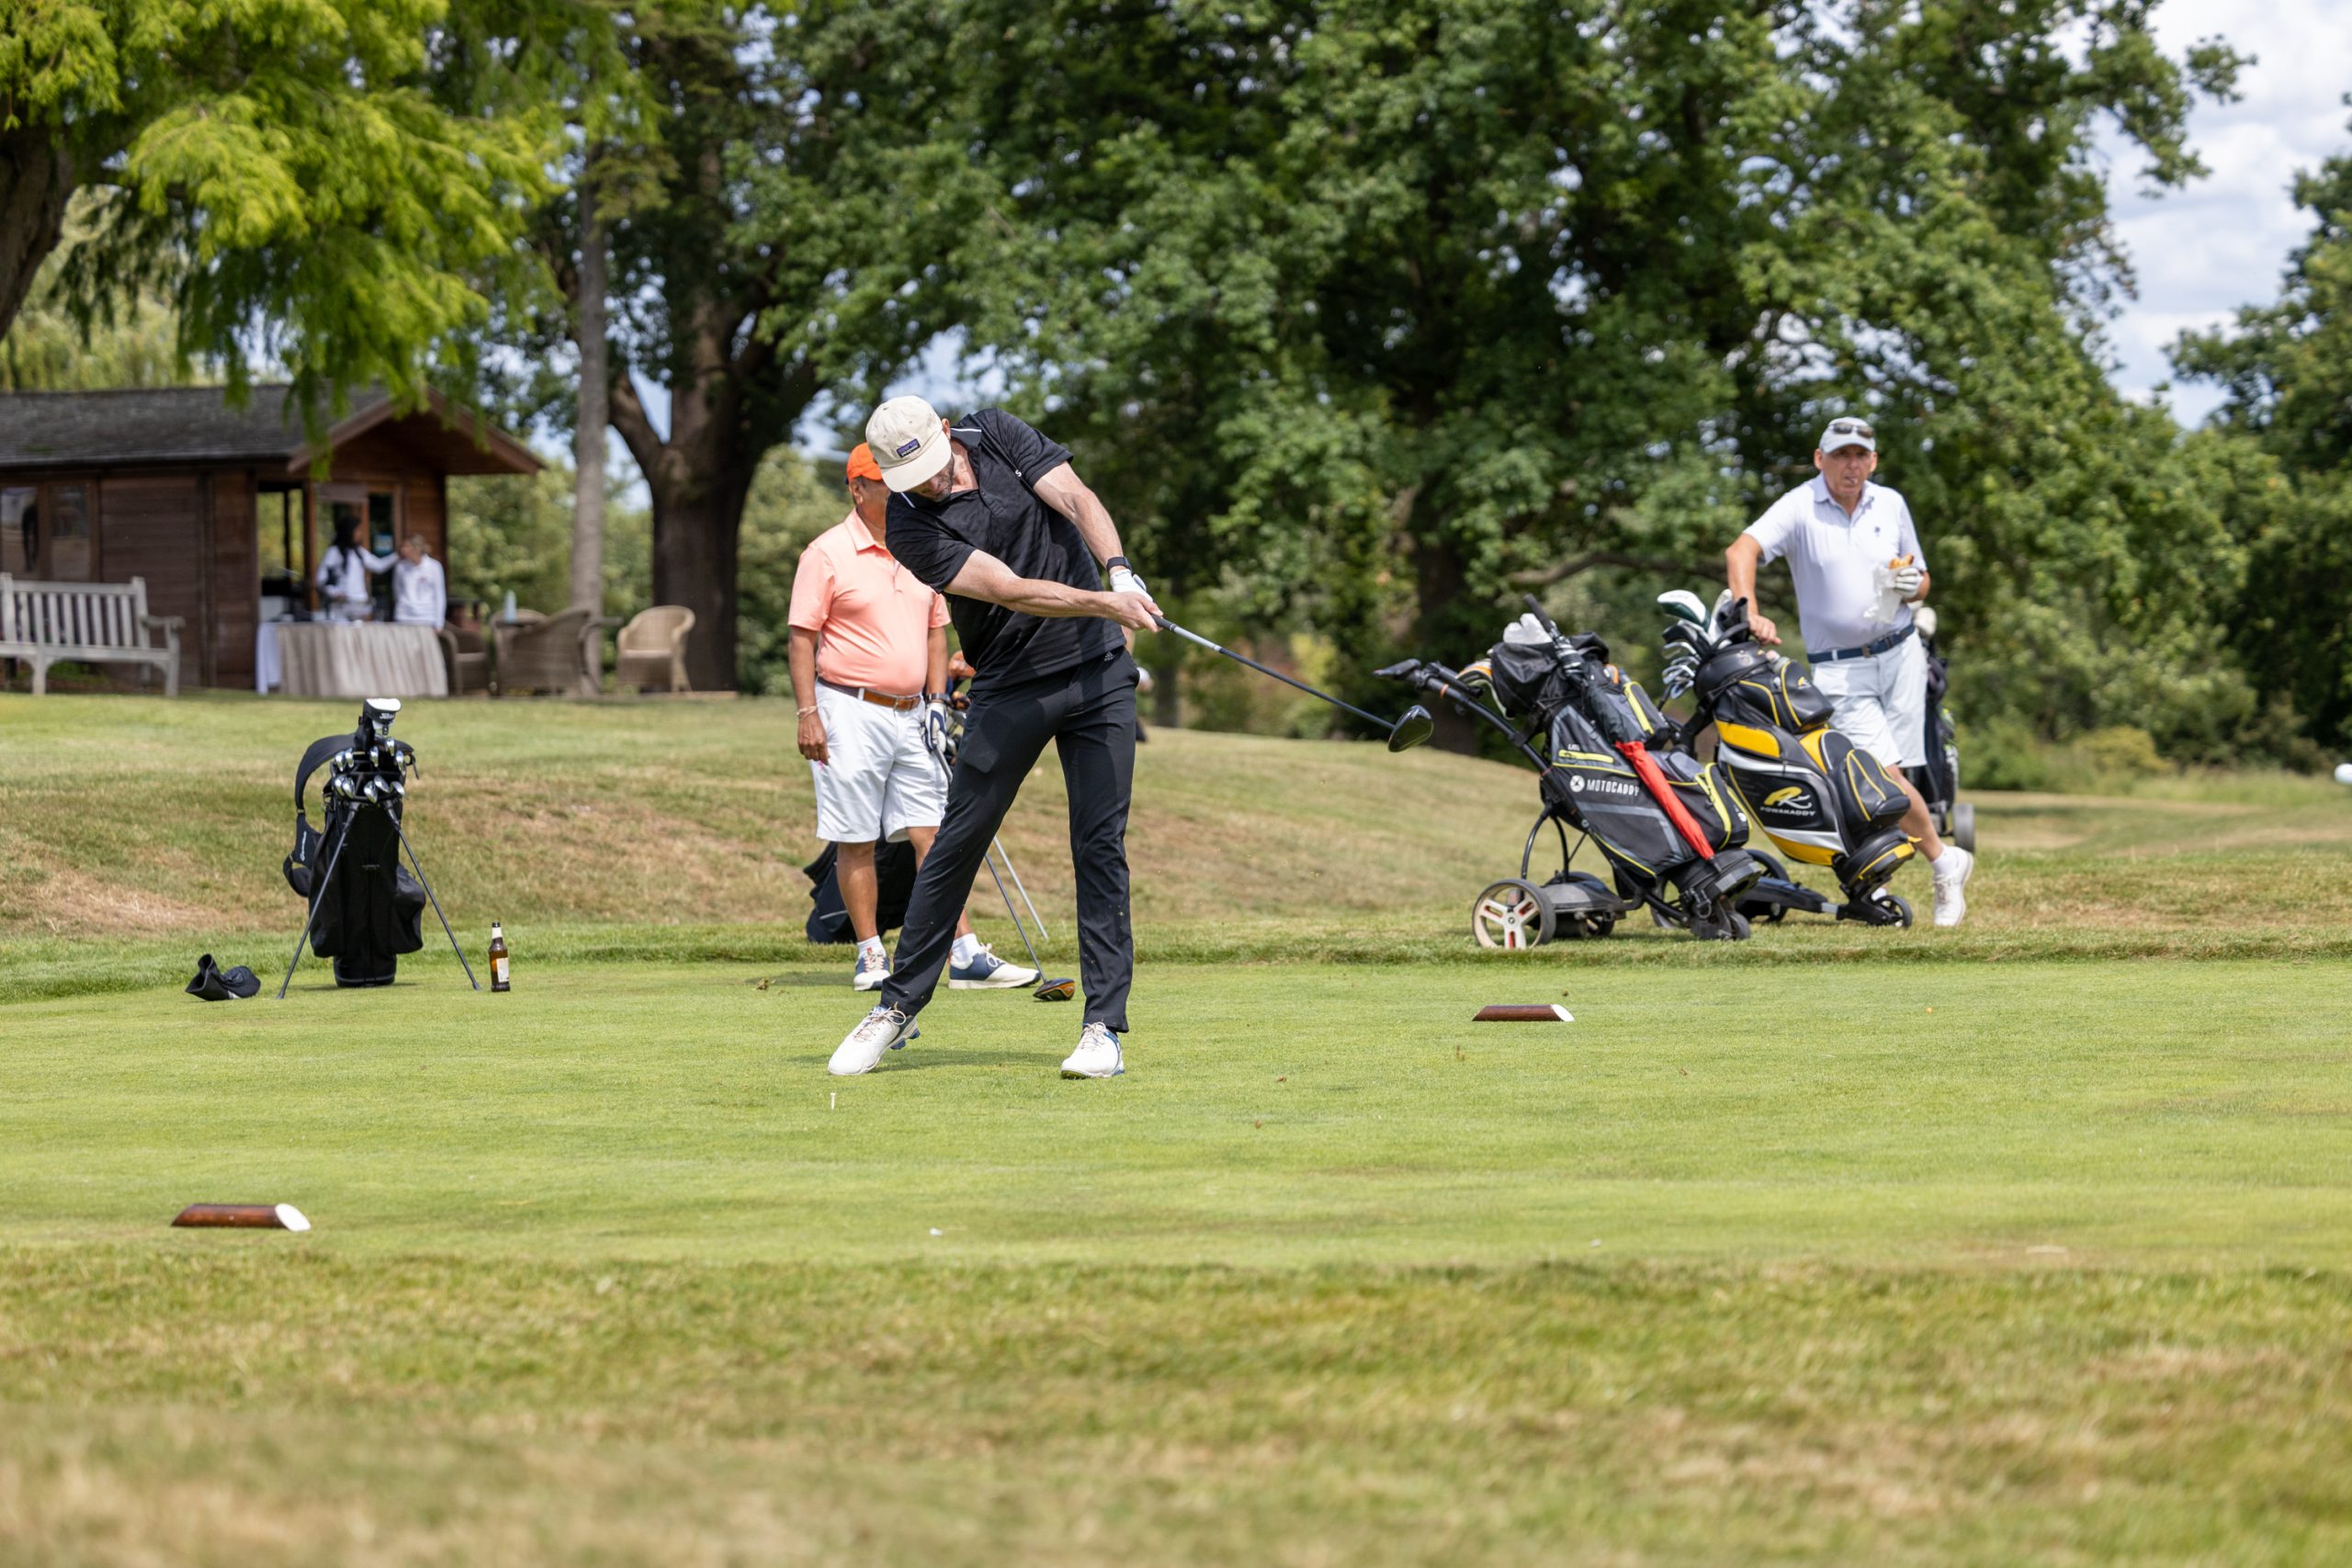 The UK Dentistry Golf Championship brought the trade and profession together for some friendly competition and networking. Find out how the day unfolded and who went home with the winning trophy...